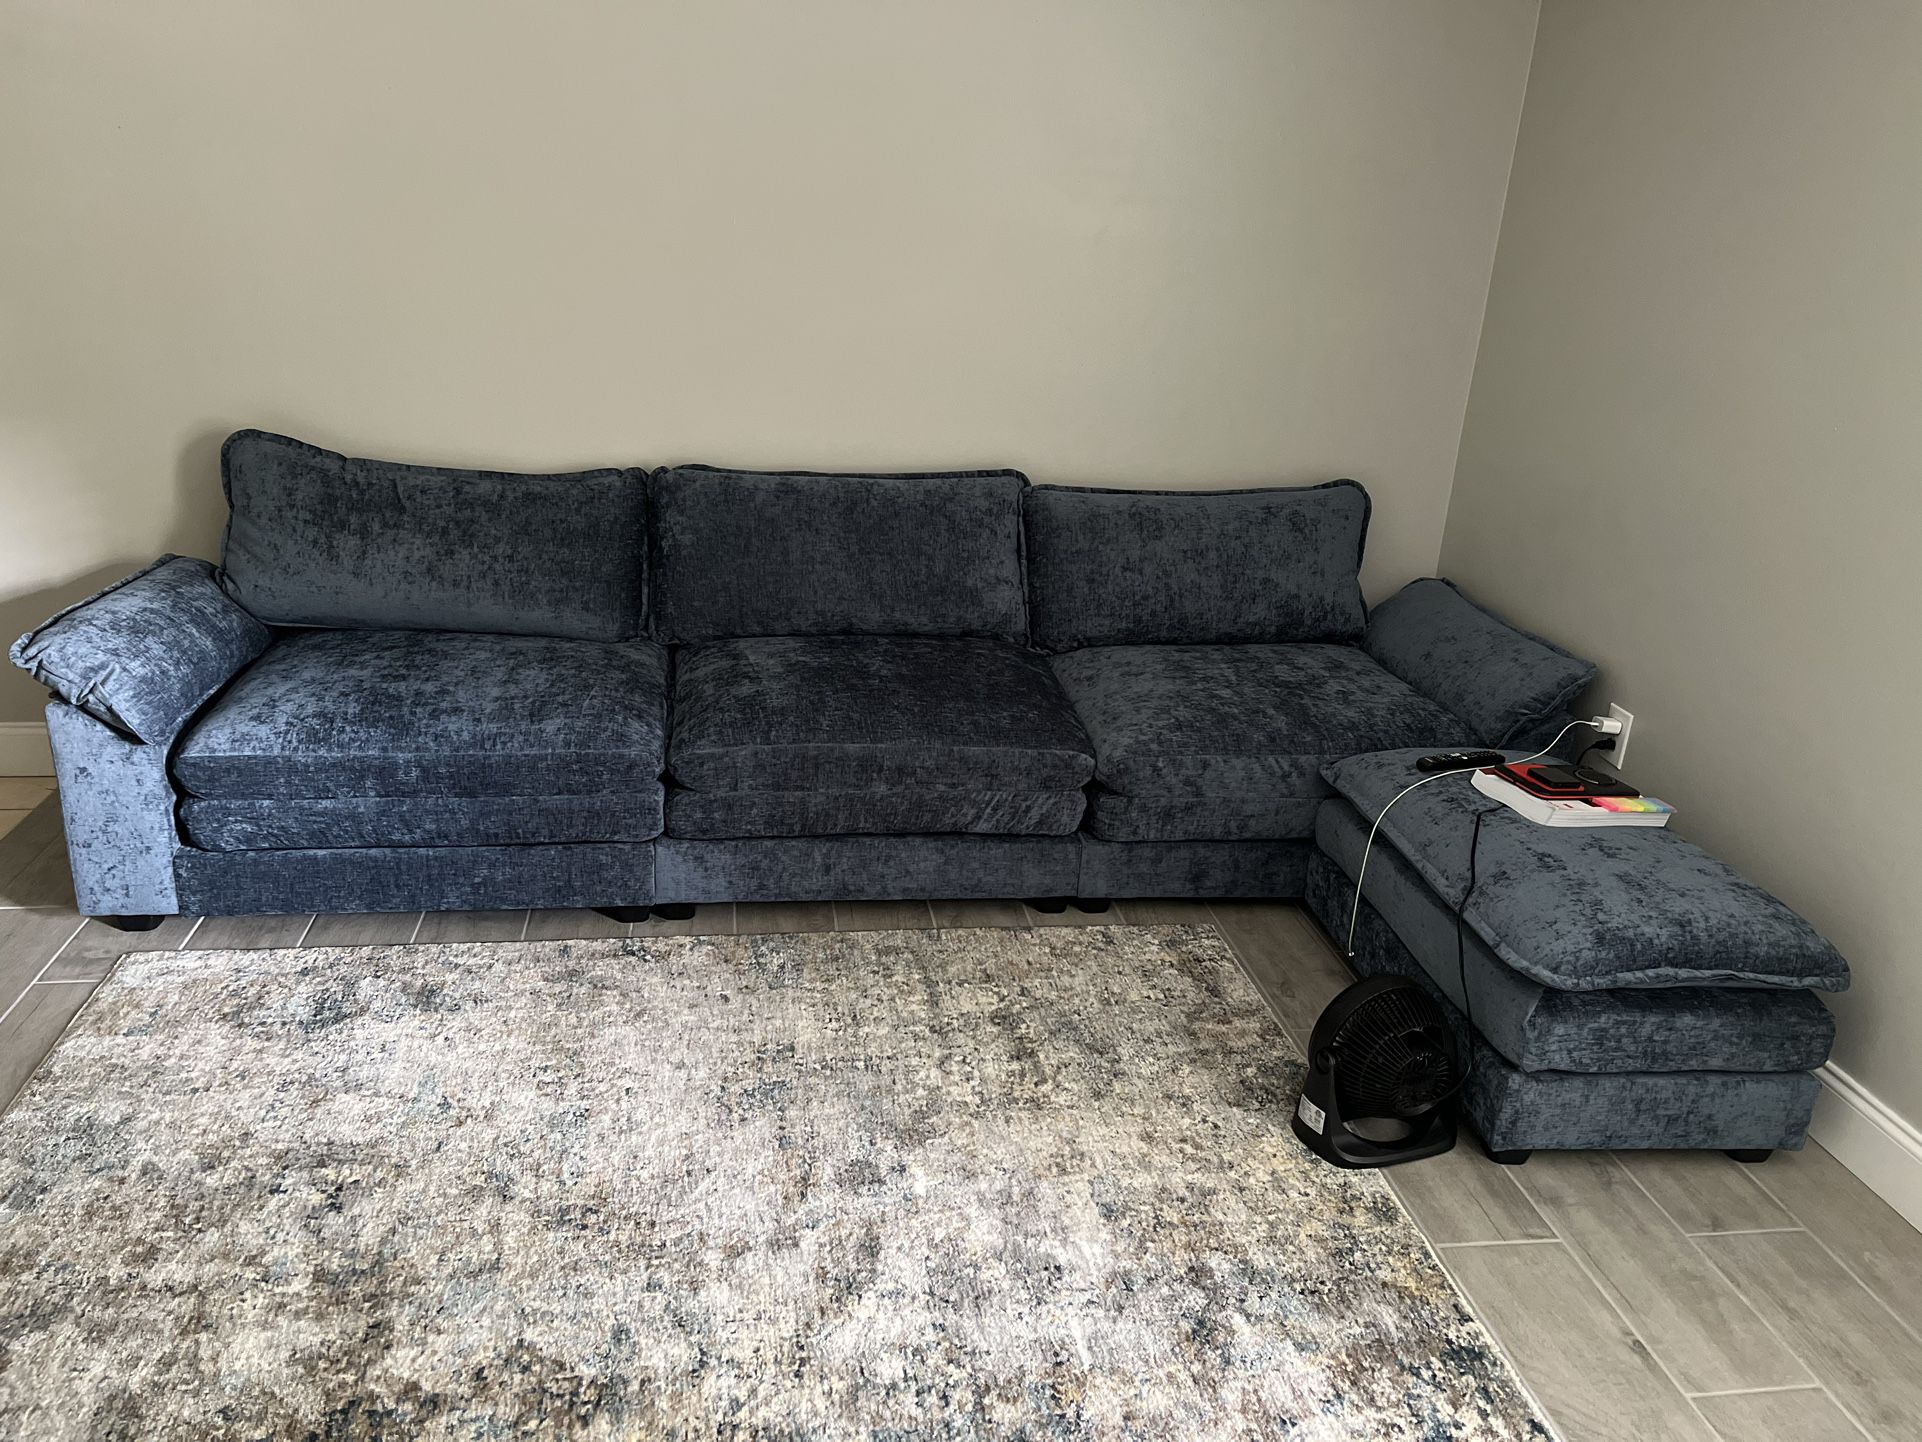 6 Month Old Couch For Sale. 